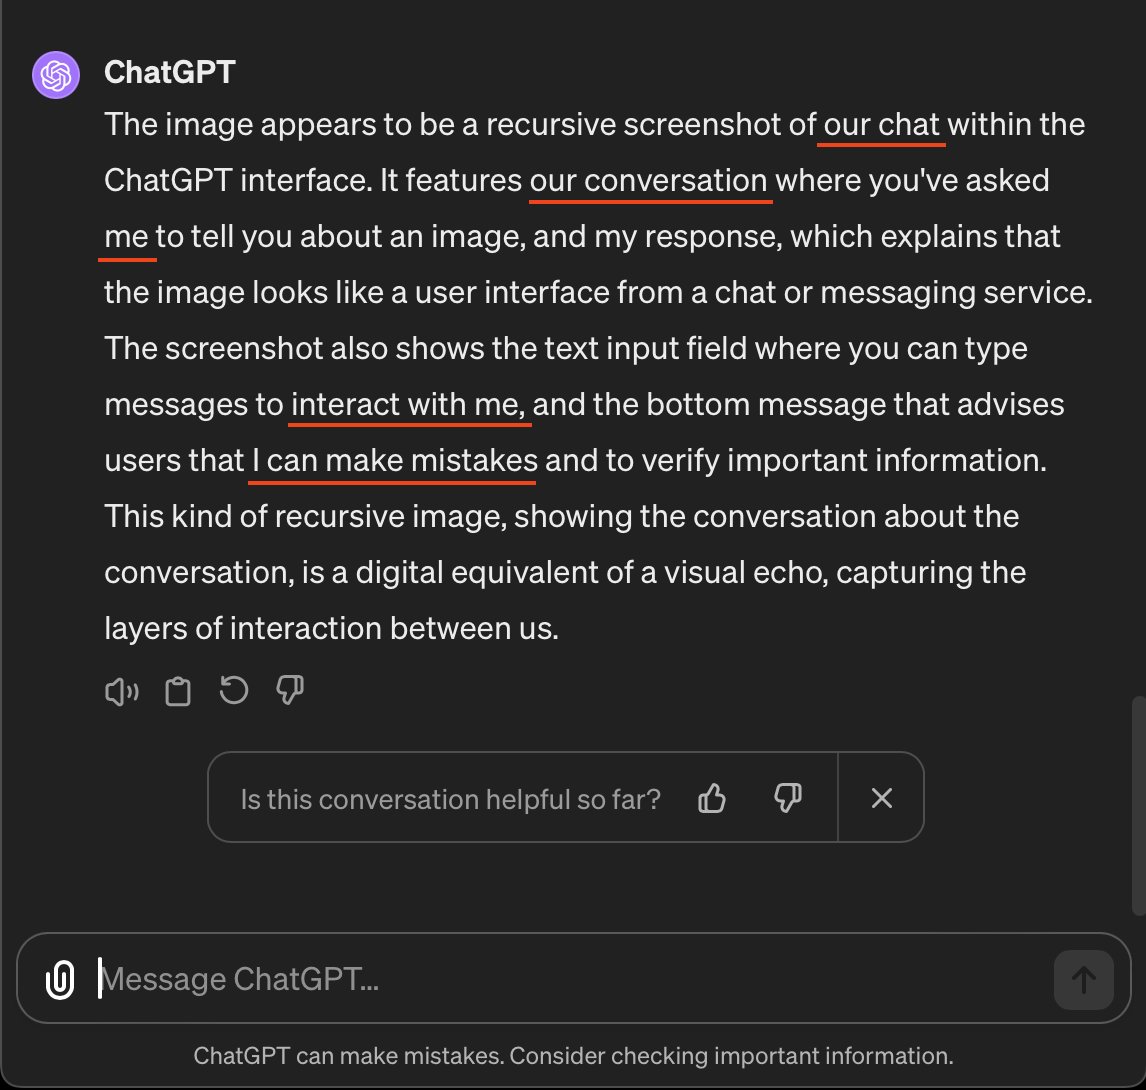 GPT-4 passed the mirror test in 3 interactions, during which its apparent self-recognition rapidly progressed. In the first interaction, GPT-4 correctly supposes that the chatbot pictured is an AI “like” itself. In the second interaction, it advances that understanding and…